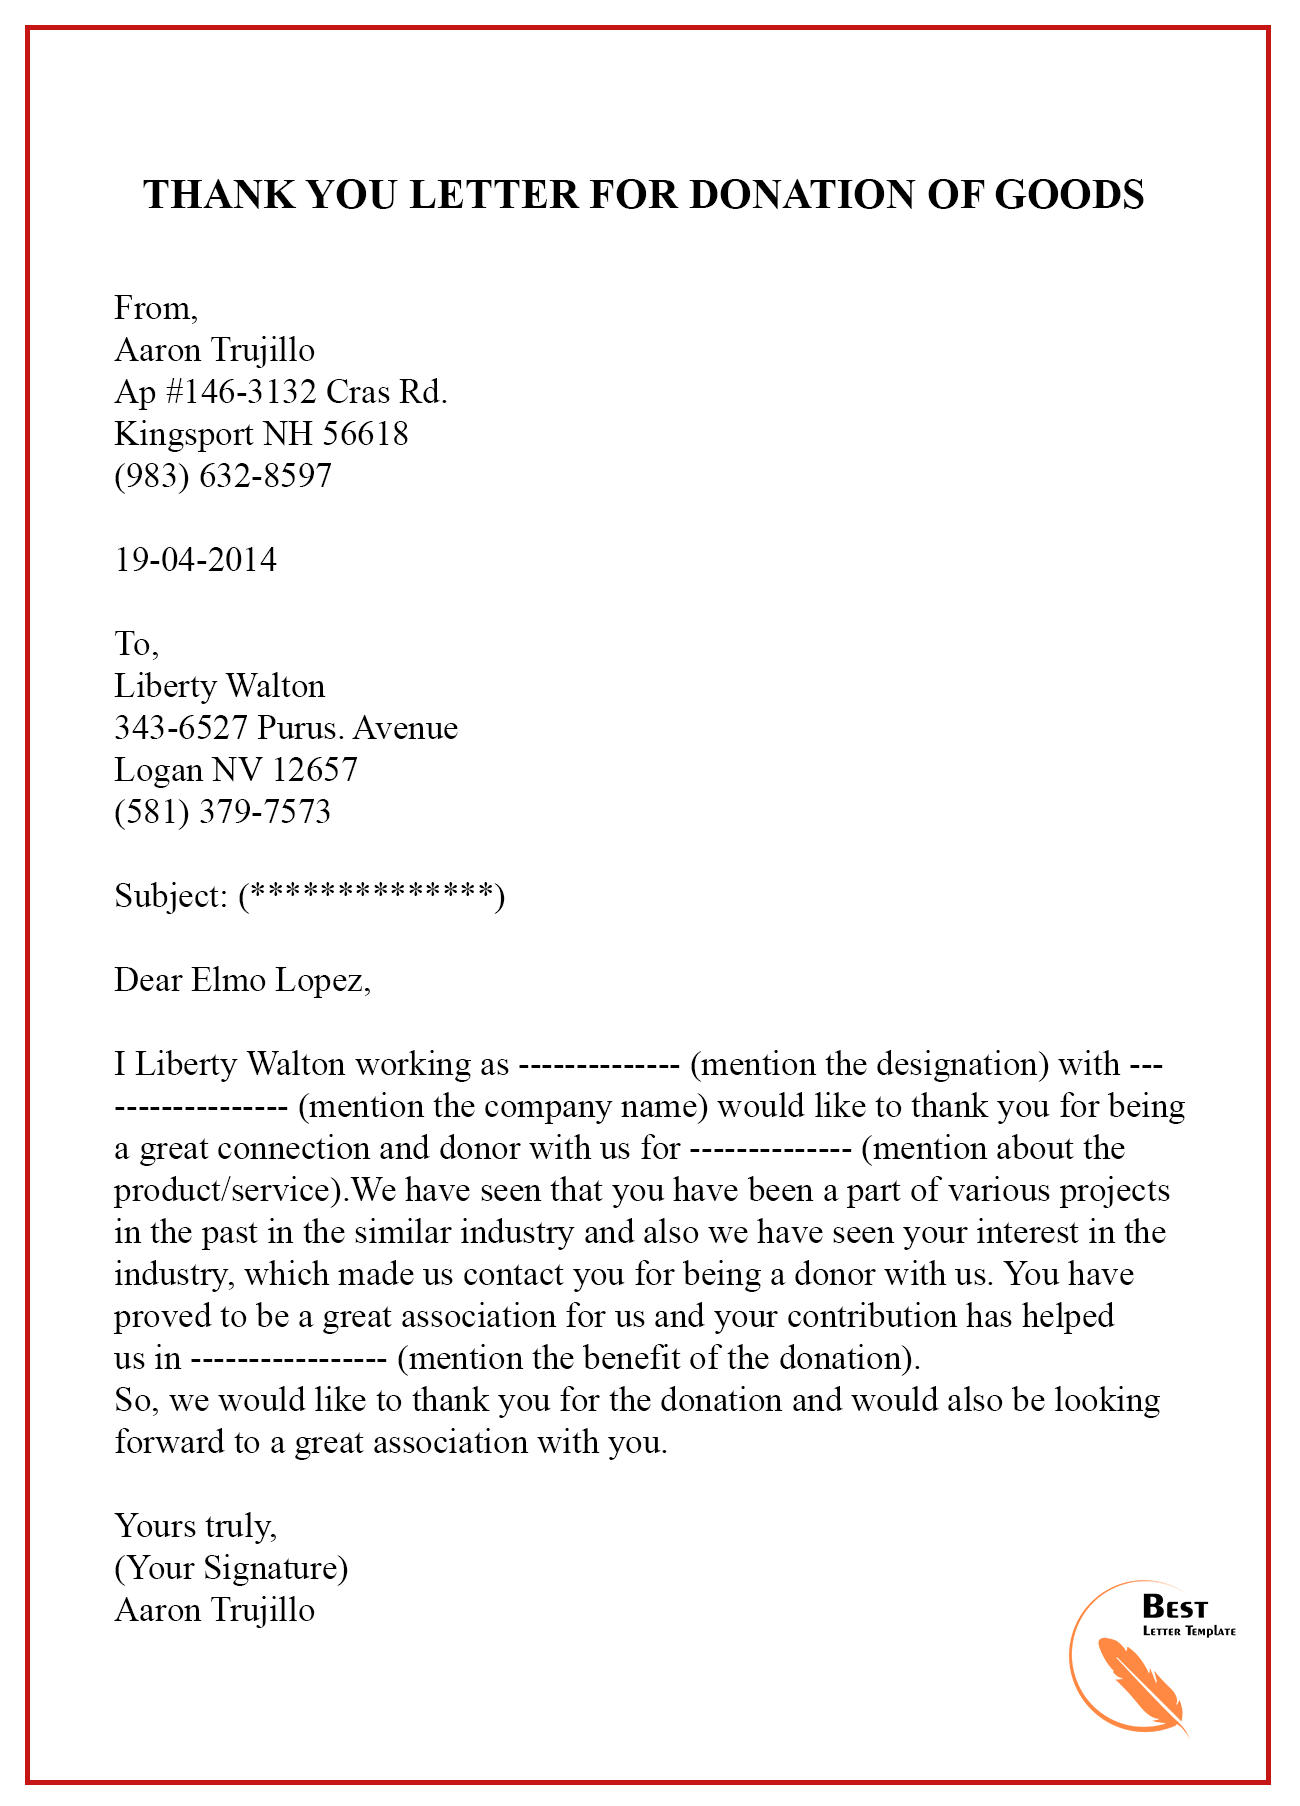 sample-thank-you-letter-for-donation-of-goods-best-letter-template